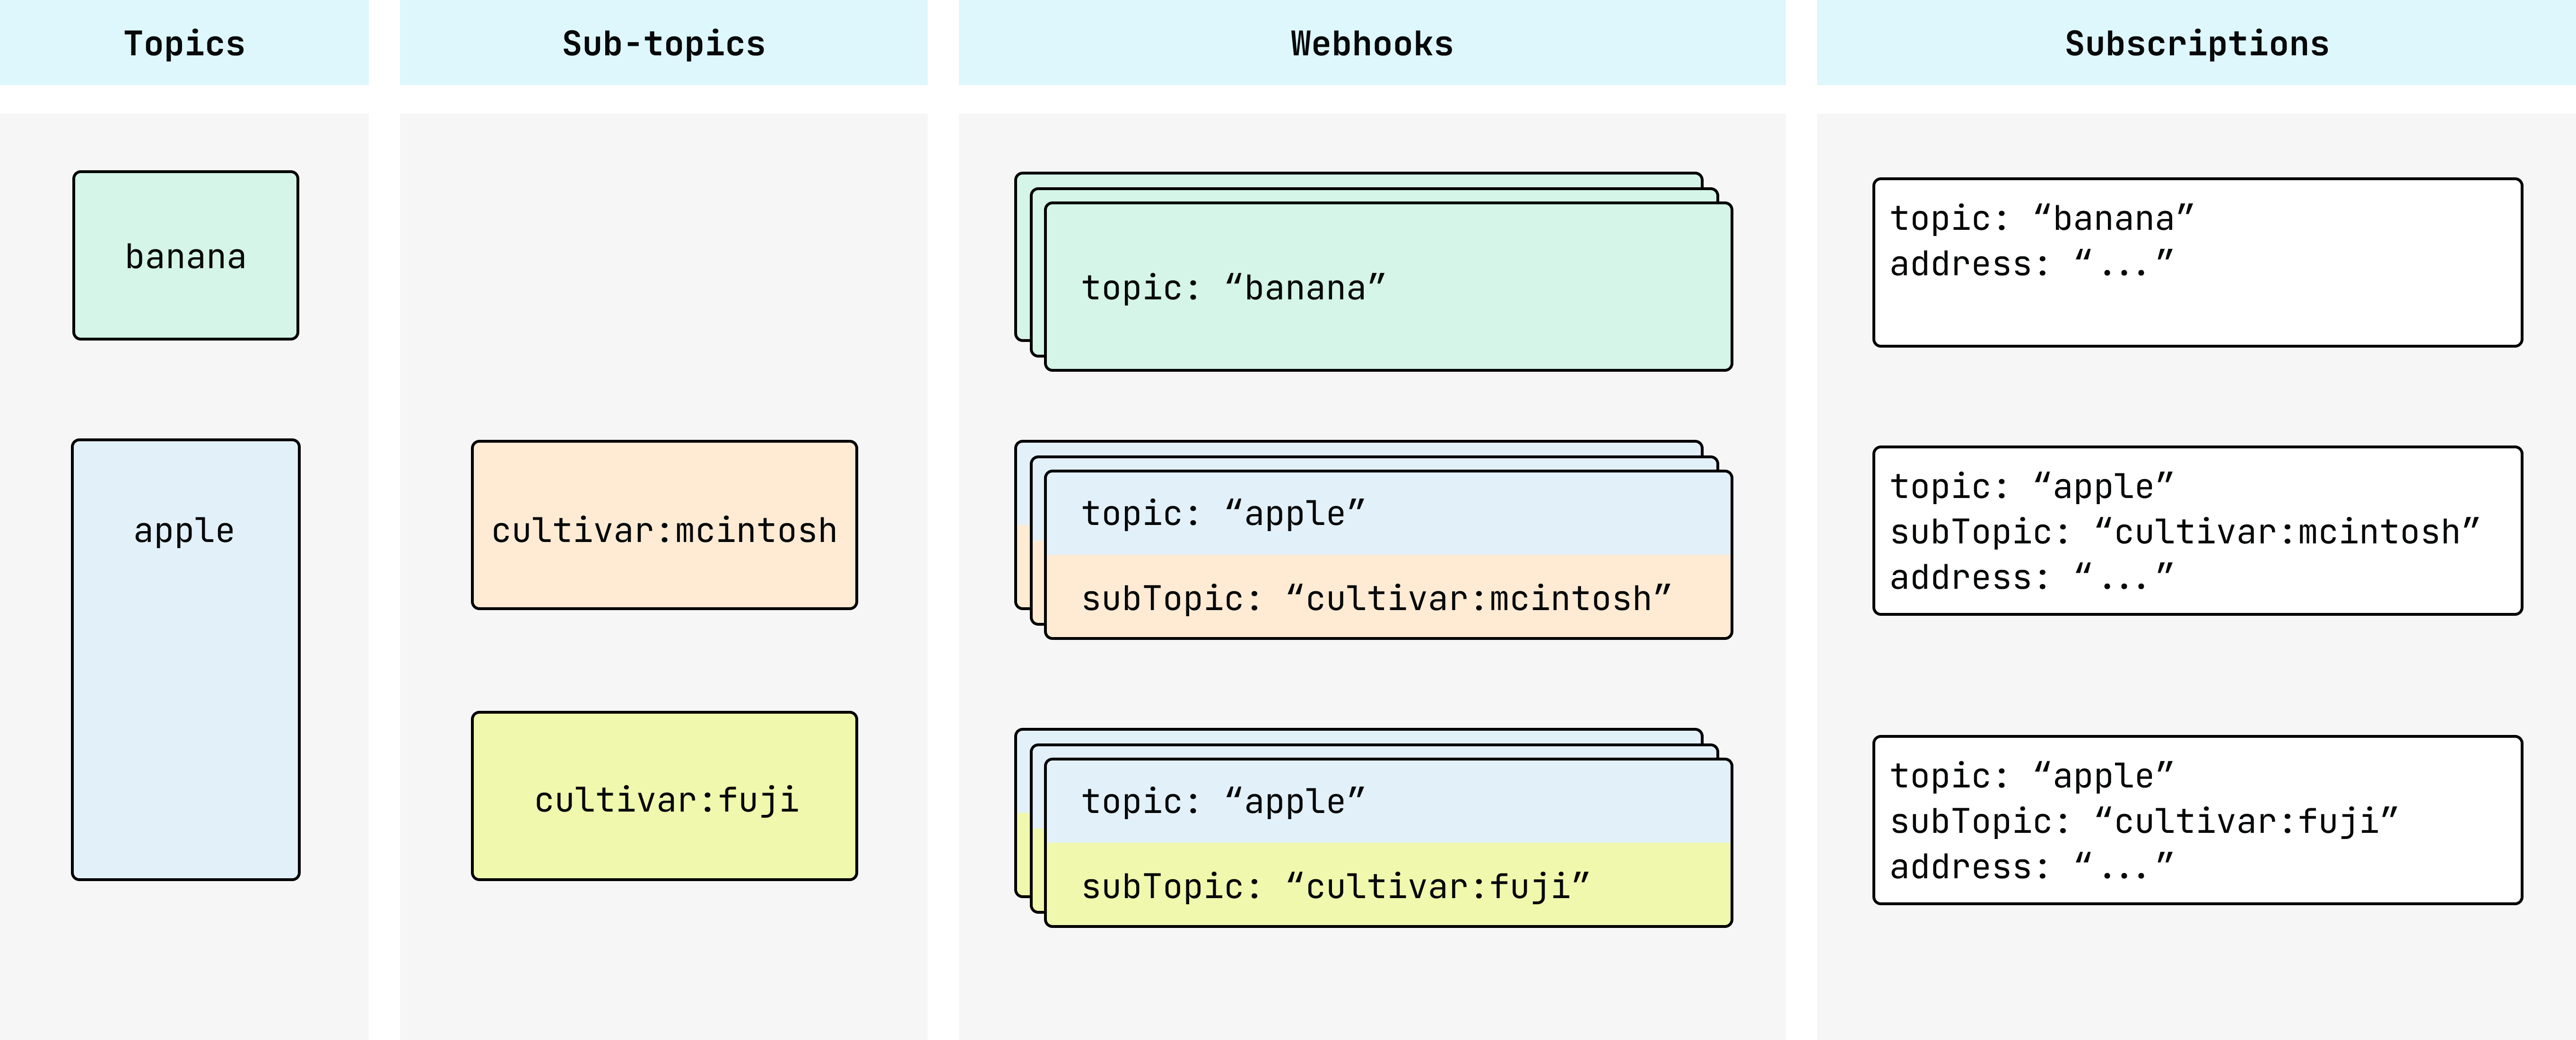 An overview showing the relationship between topics, sub-topics, webhooks, and subscriptions